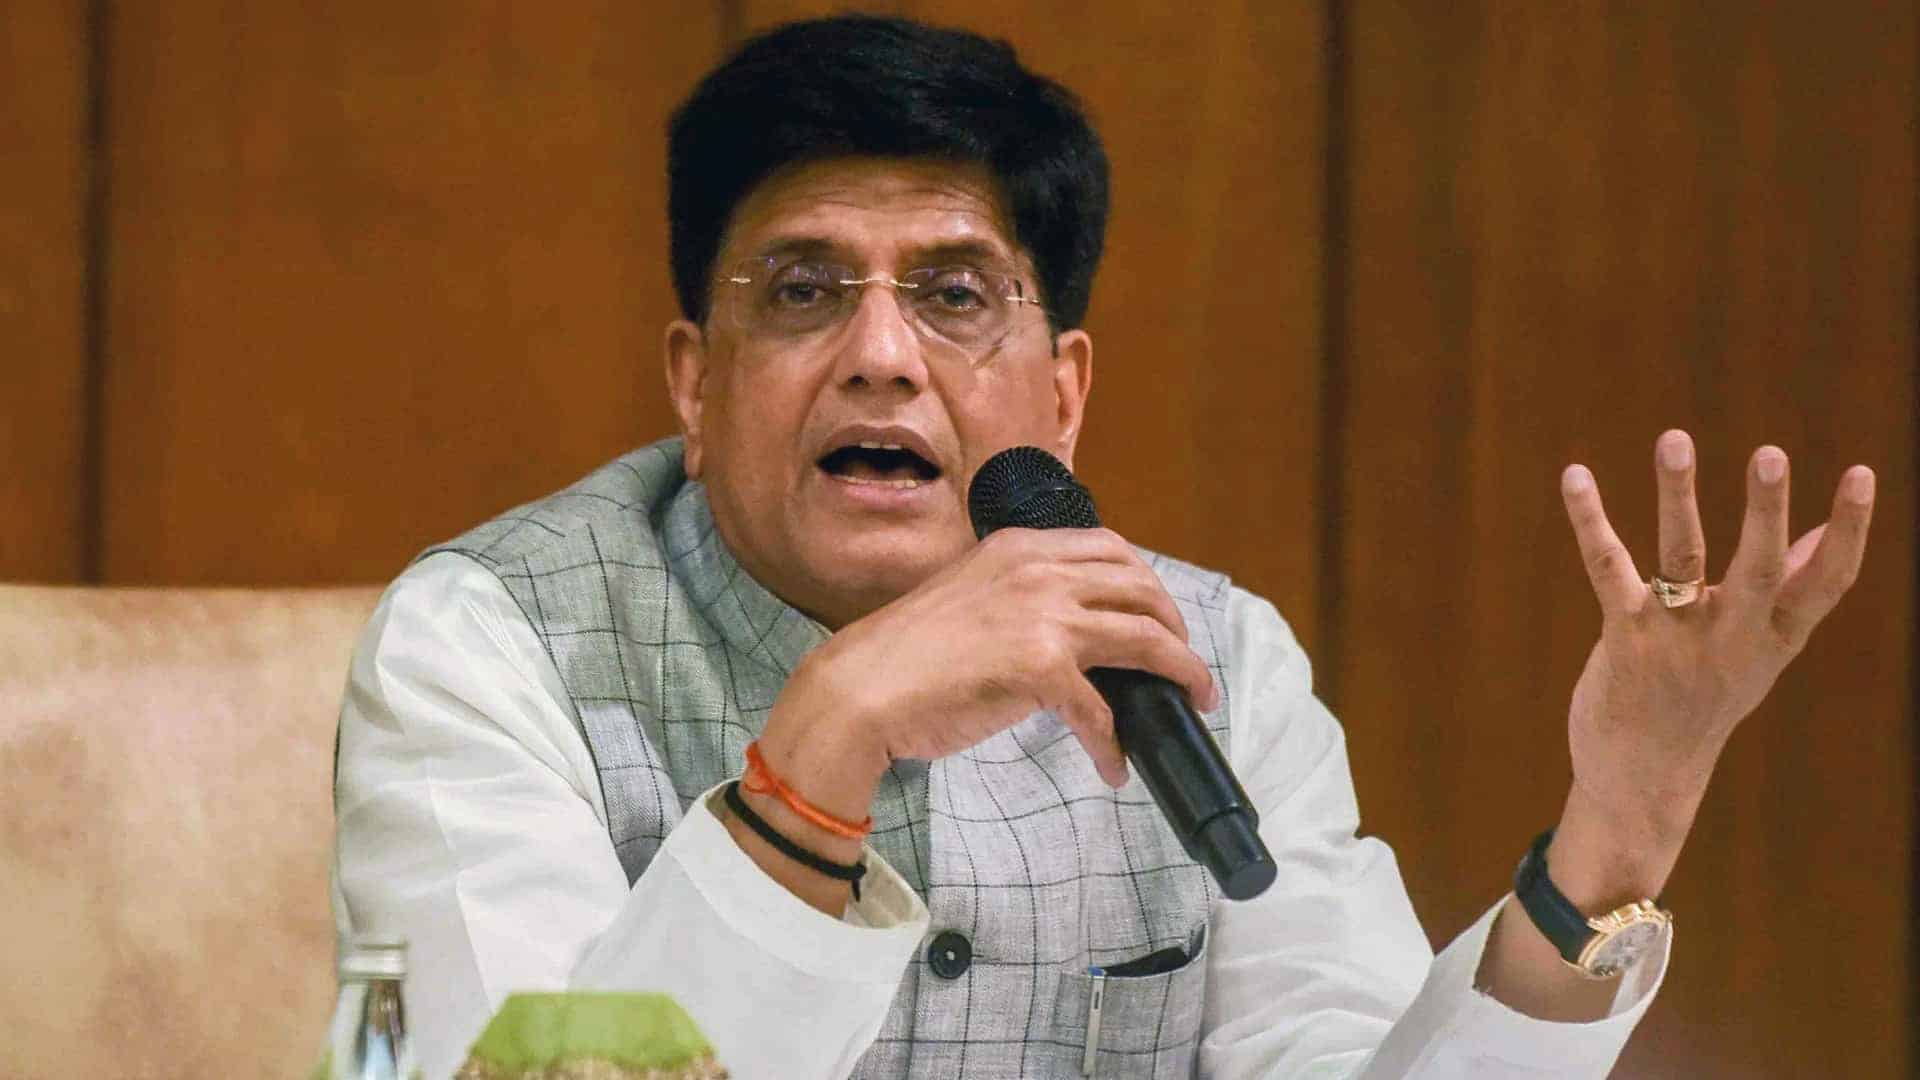 Govt keen to use AI in GeM to make it more effective: Goyal